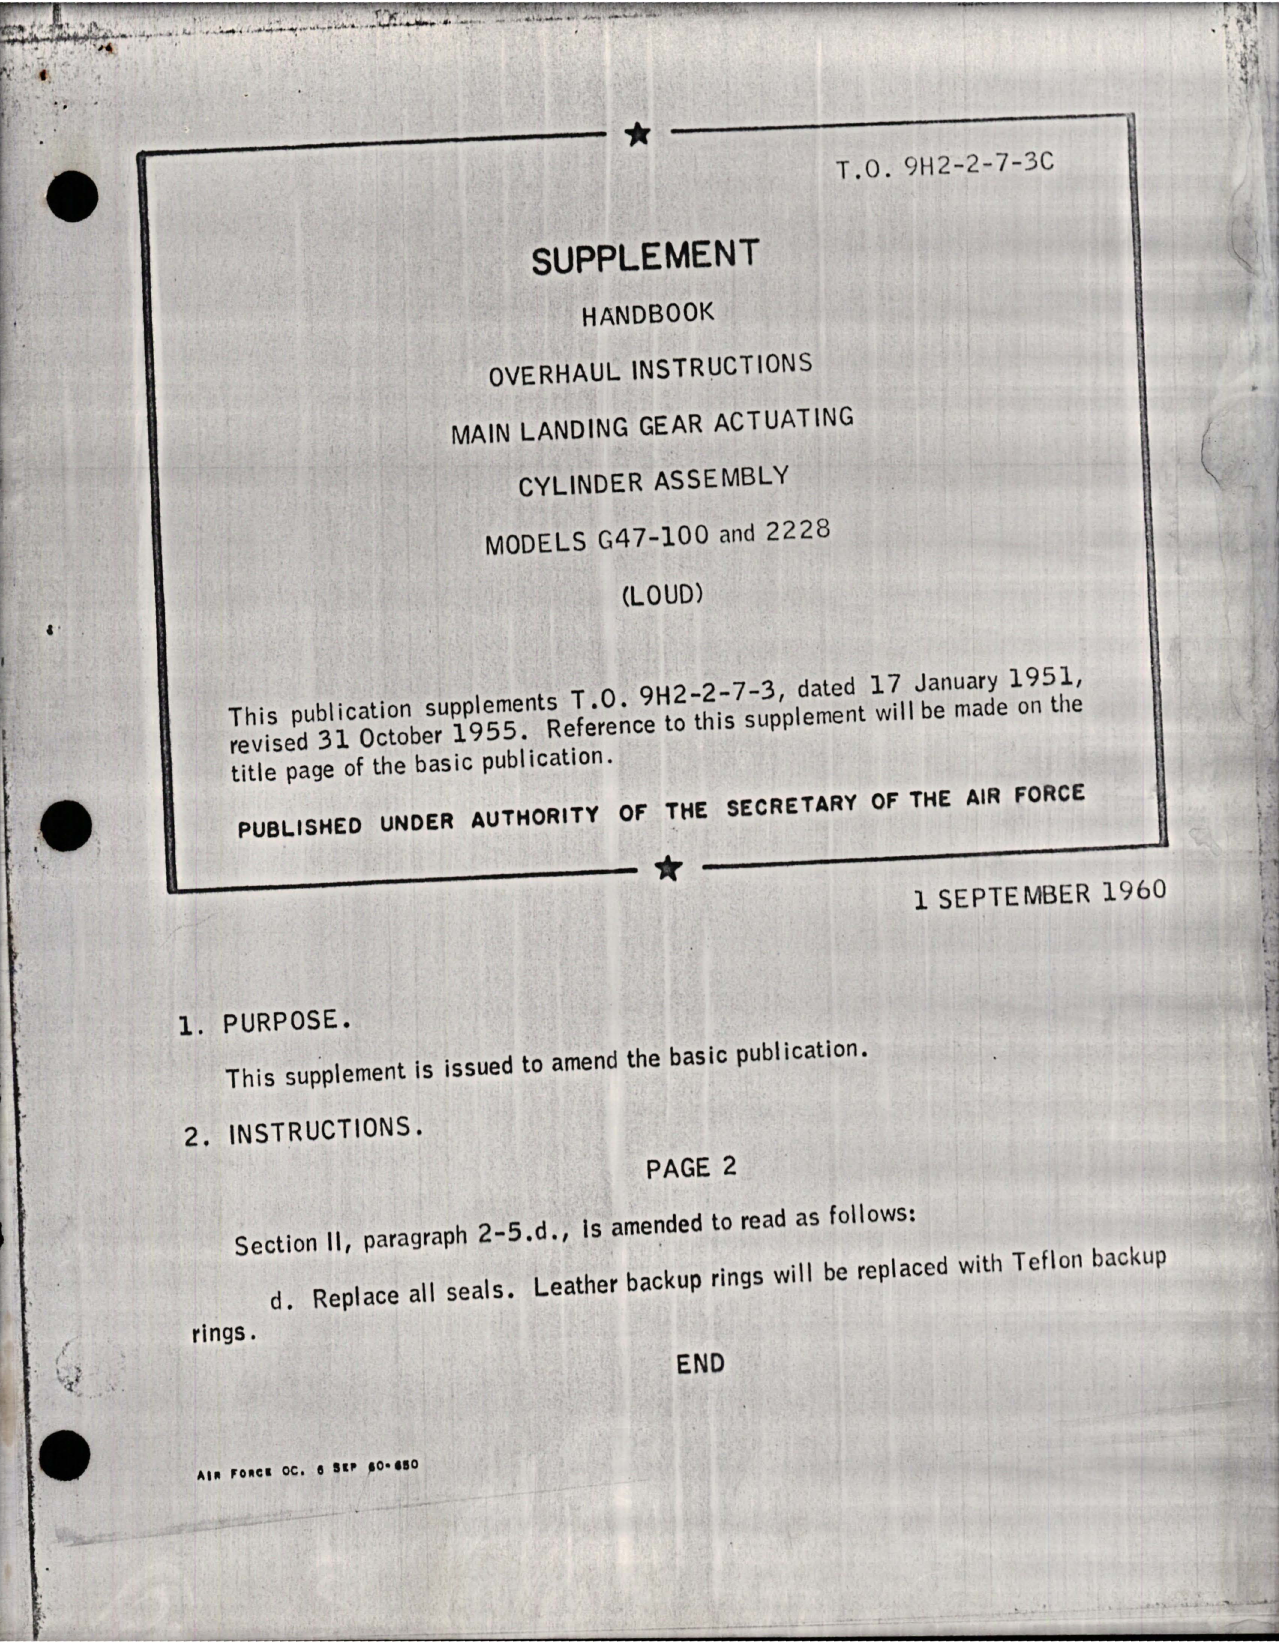 Sample page 1 from AirCorps Library document: Supplement to Overhaul Instructions for Main Landing Gear Actuating Cylinder Assembly - Models G47-100 and 2228 